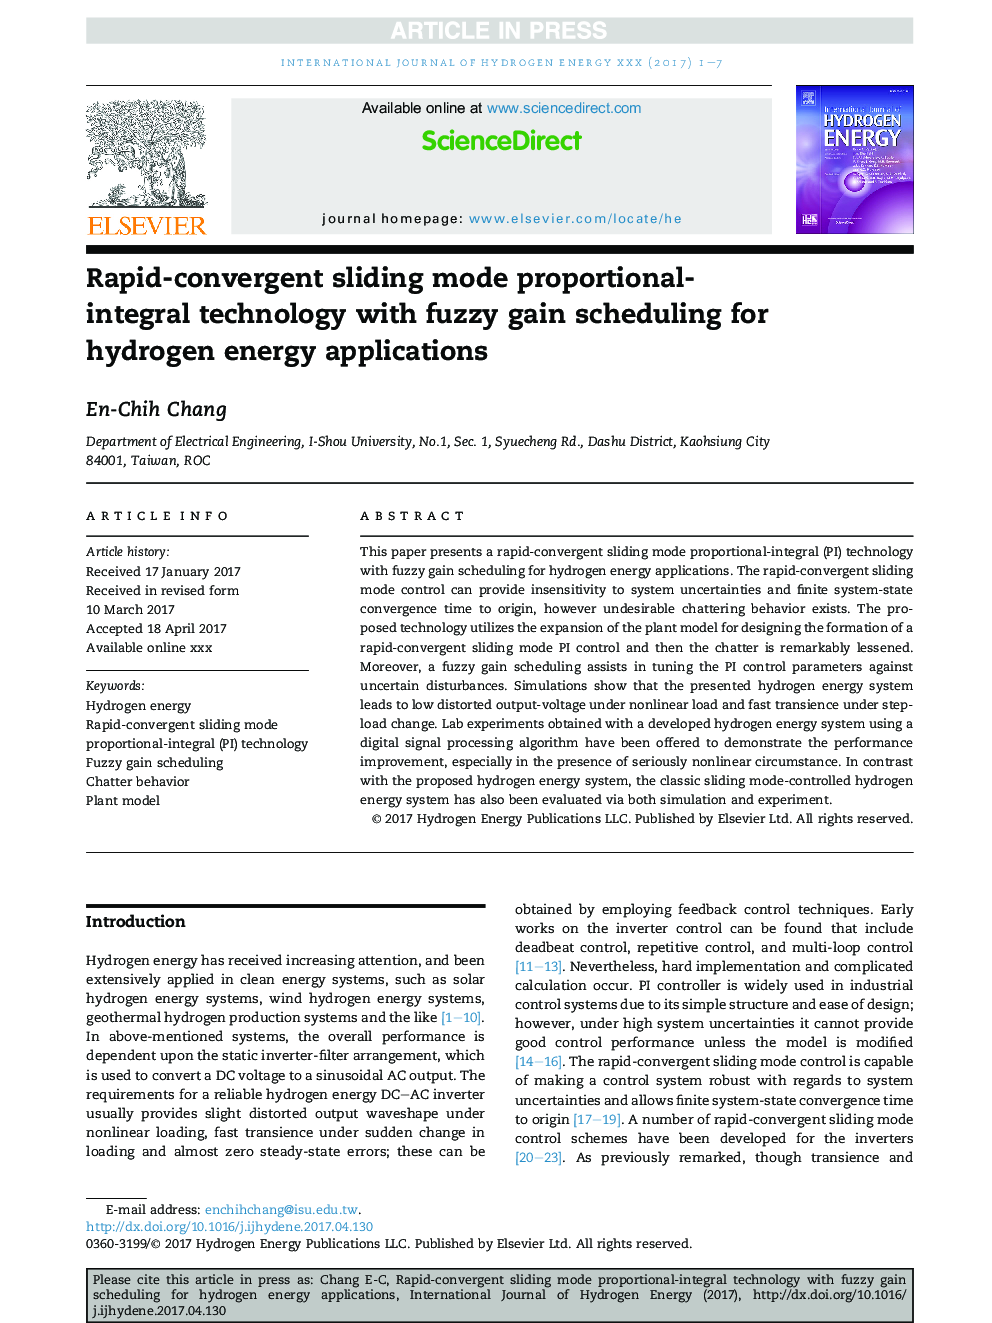 Rapid-convergent sliding mode proportional-integral technology with fuzzy gain scheduling for hydrogen energy applications